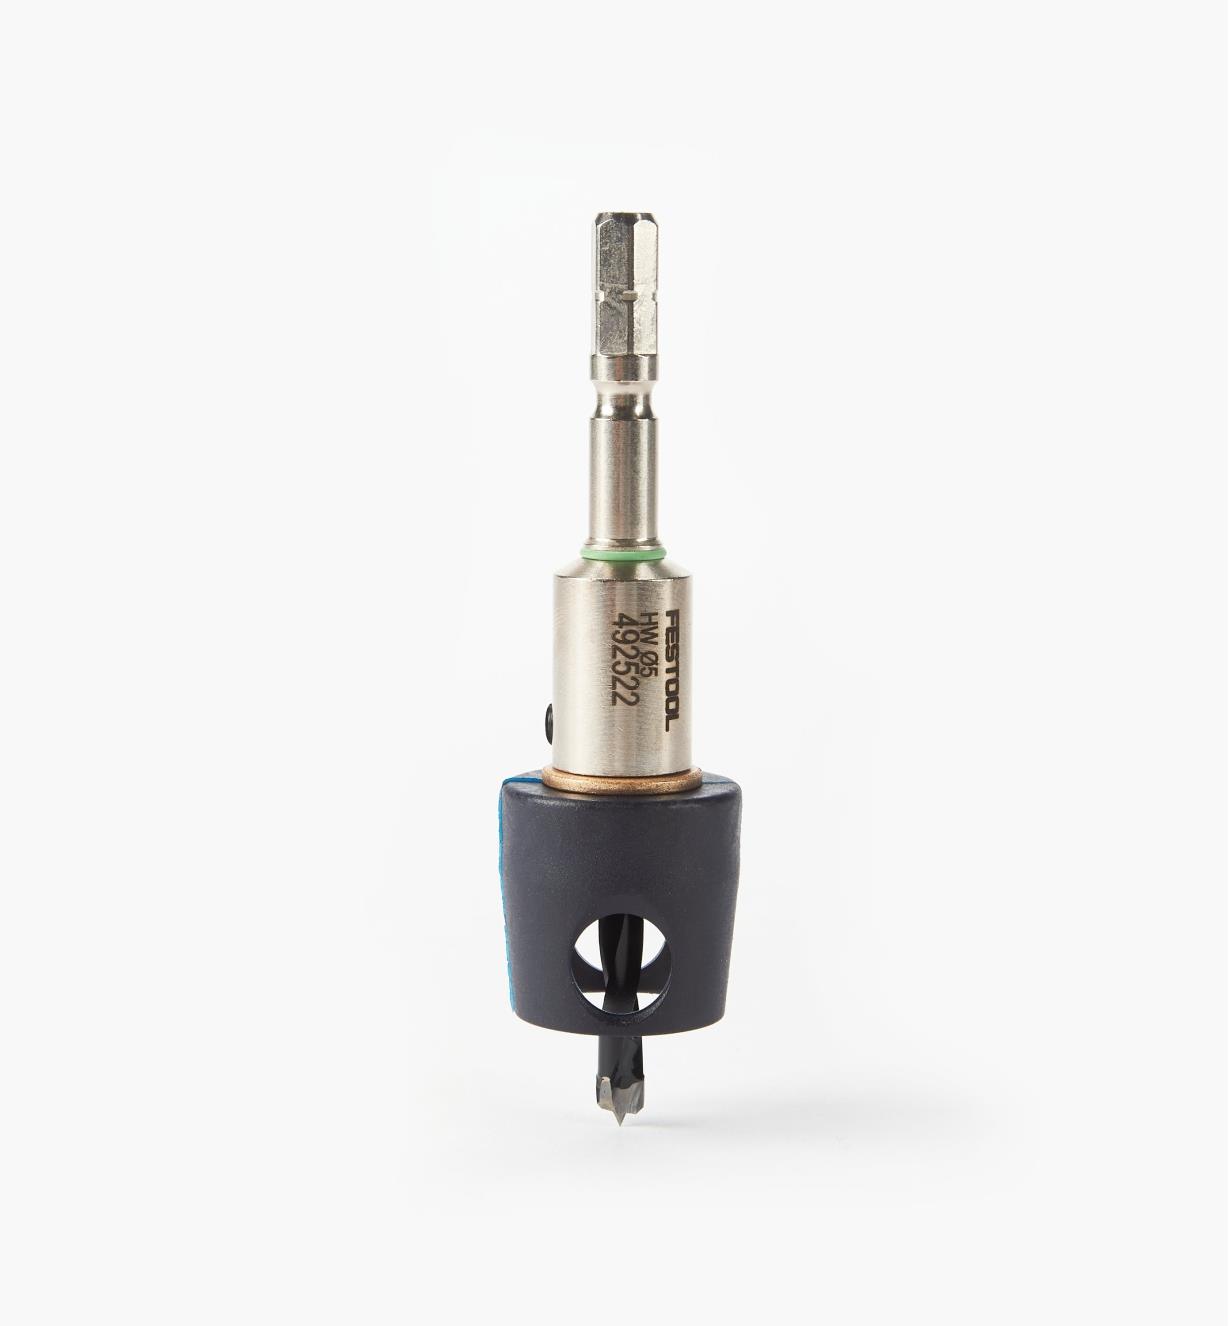 ZA492522 - Centrotec Drill Bit With Depth Stop - 5mm (3/16")